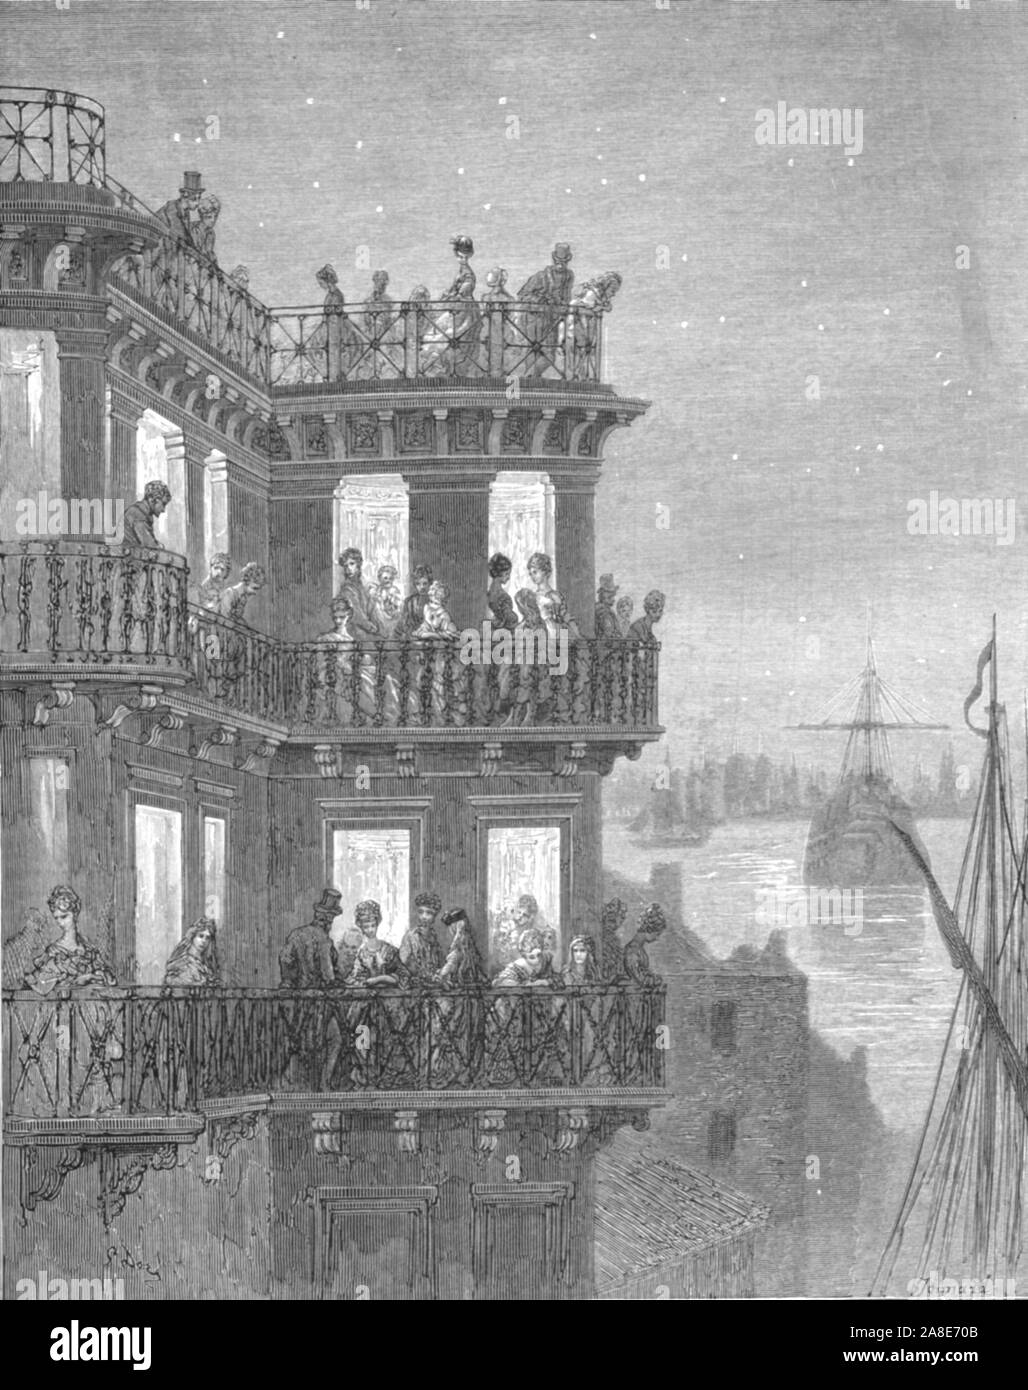 'Greenwich-In the Season', 1872. Crowded balconies overlook the River Thames at Greenwich. From, &quot;LONDON. A Pilgrimage&quot; by Gustave Dore and Blanchard Jerrold. [Grant and Co., 72-78, Turnmill Street, E.C., 1872]. Stock Photo